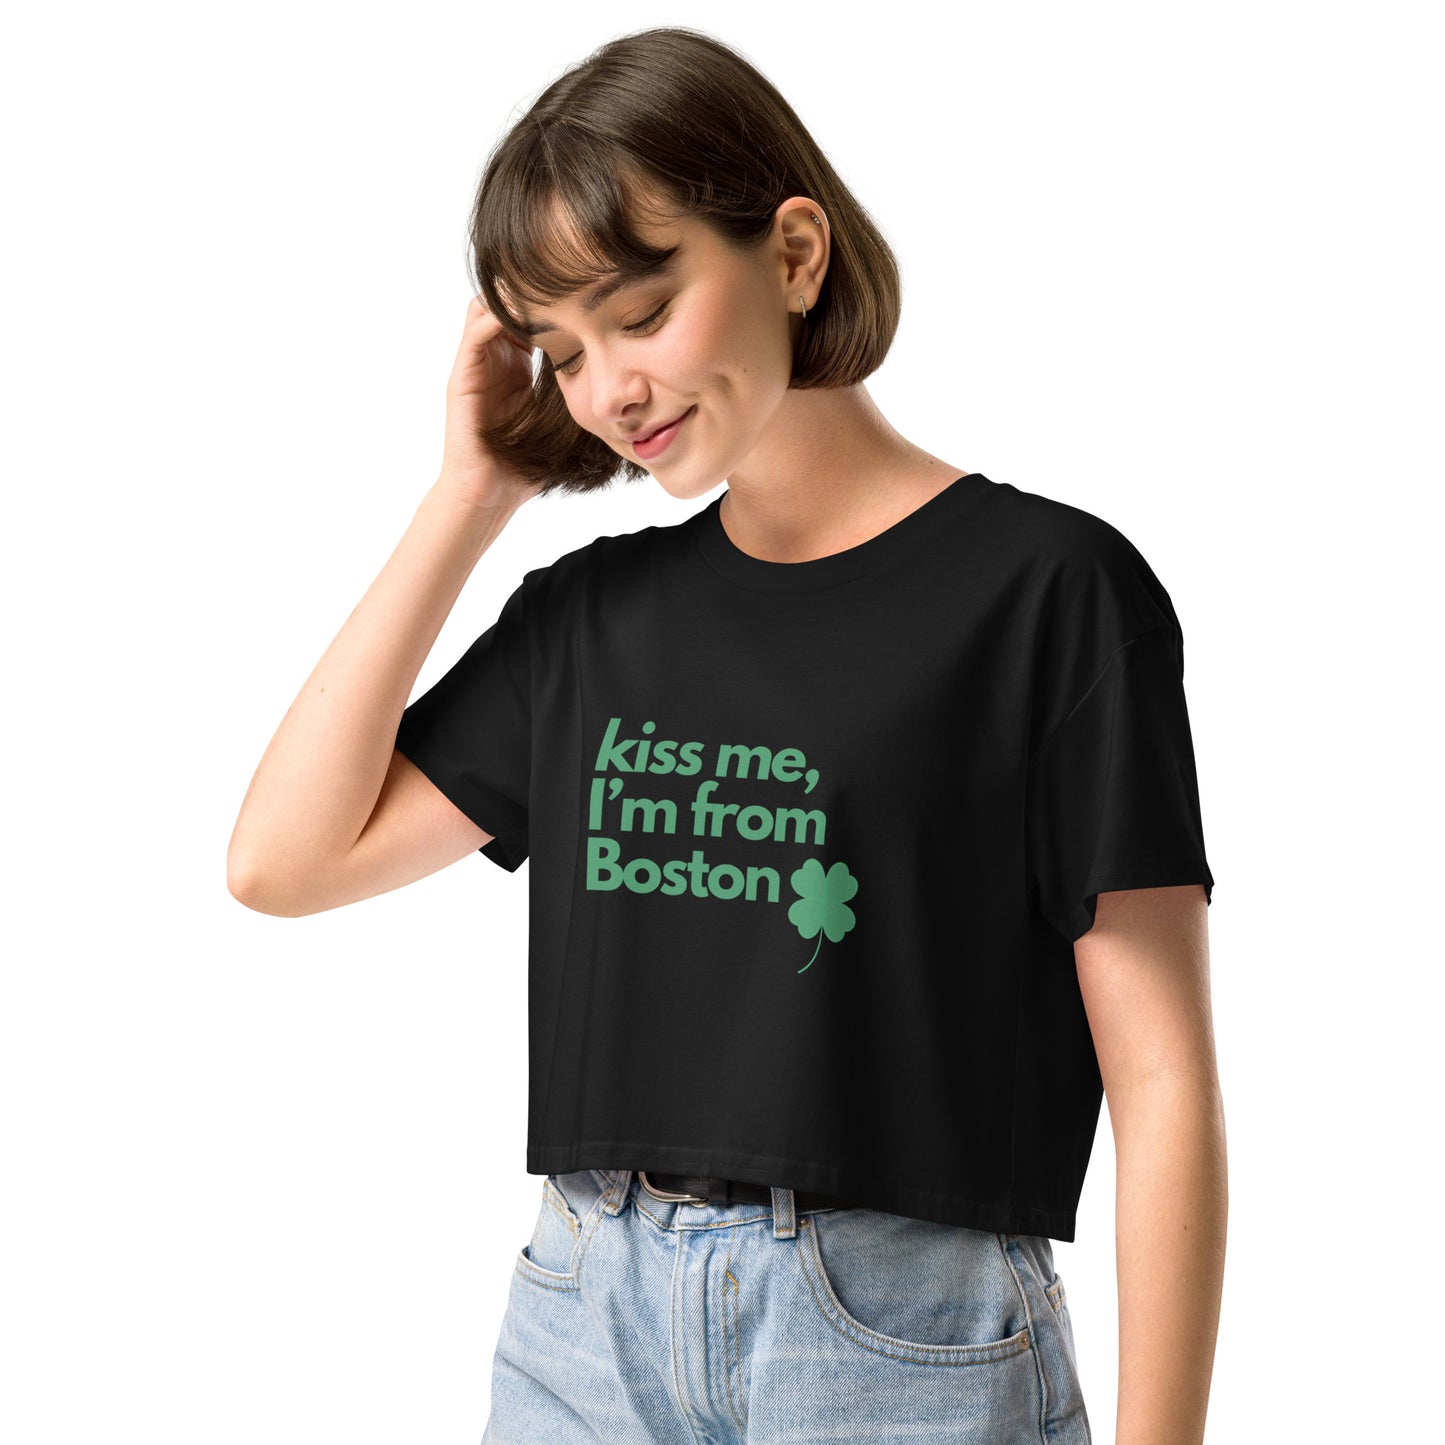 Kiss me, I'm from Boston Women’s crop top